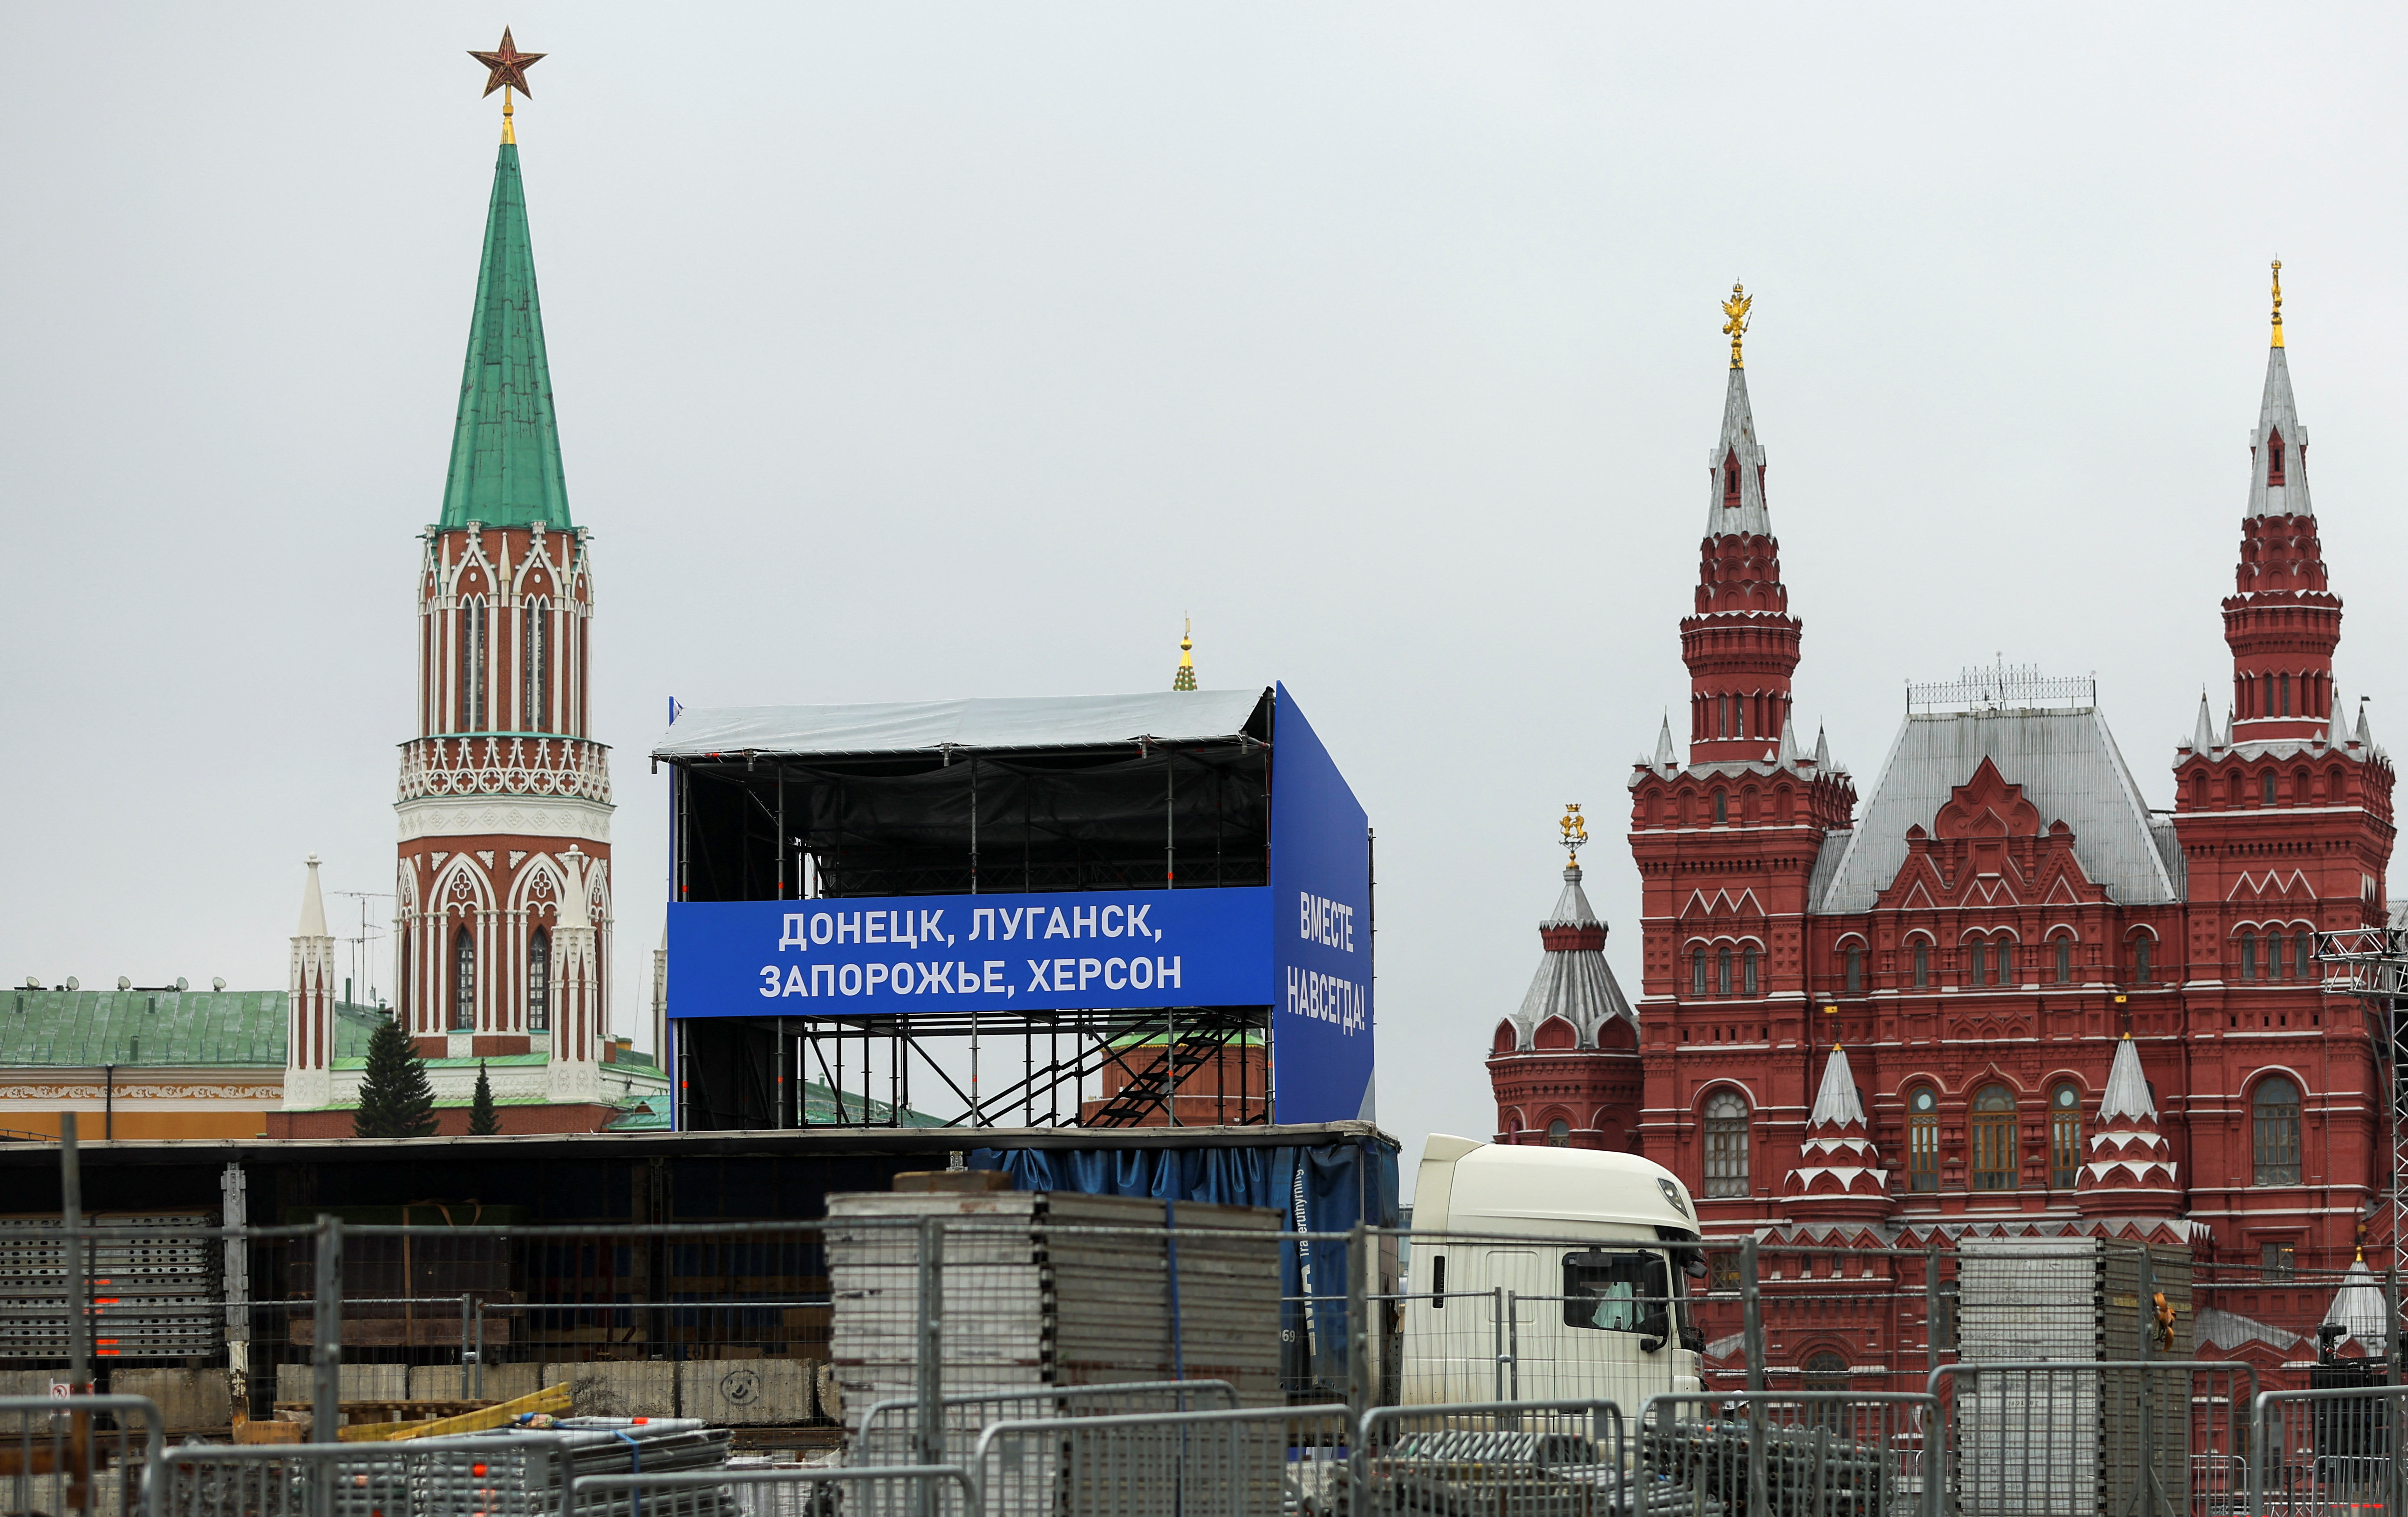 A view shows a stage under construction in Red Square in Moscow